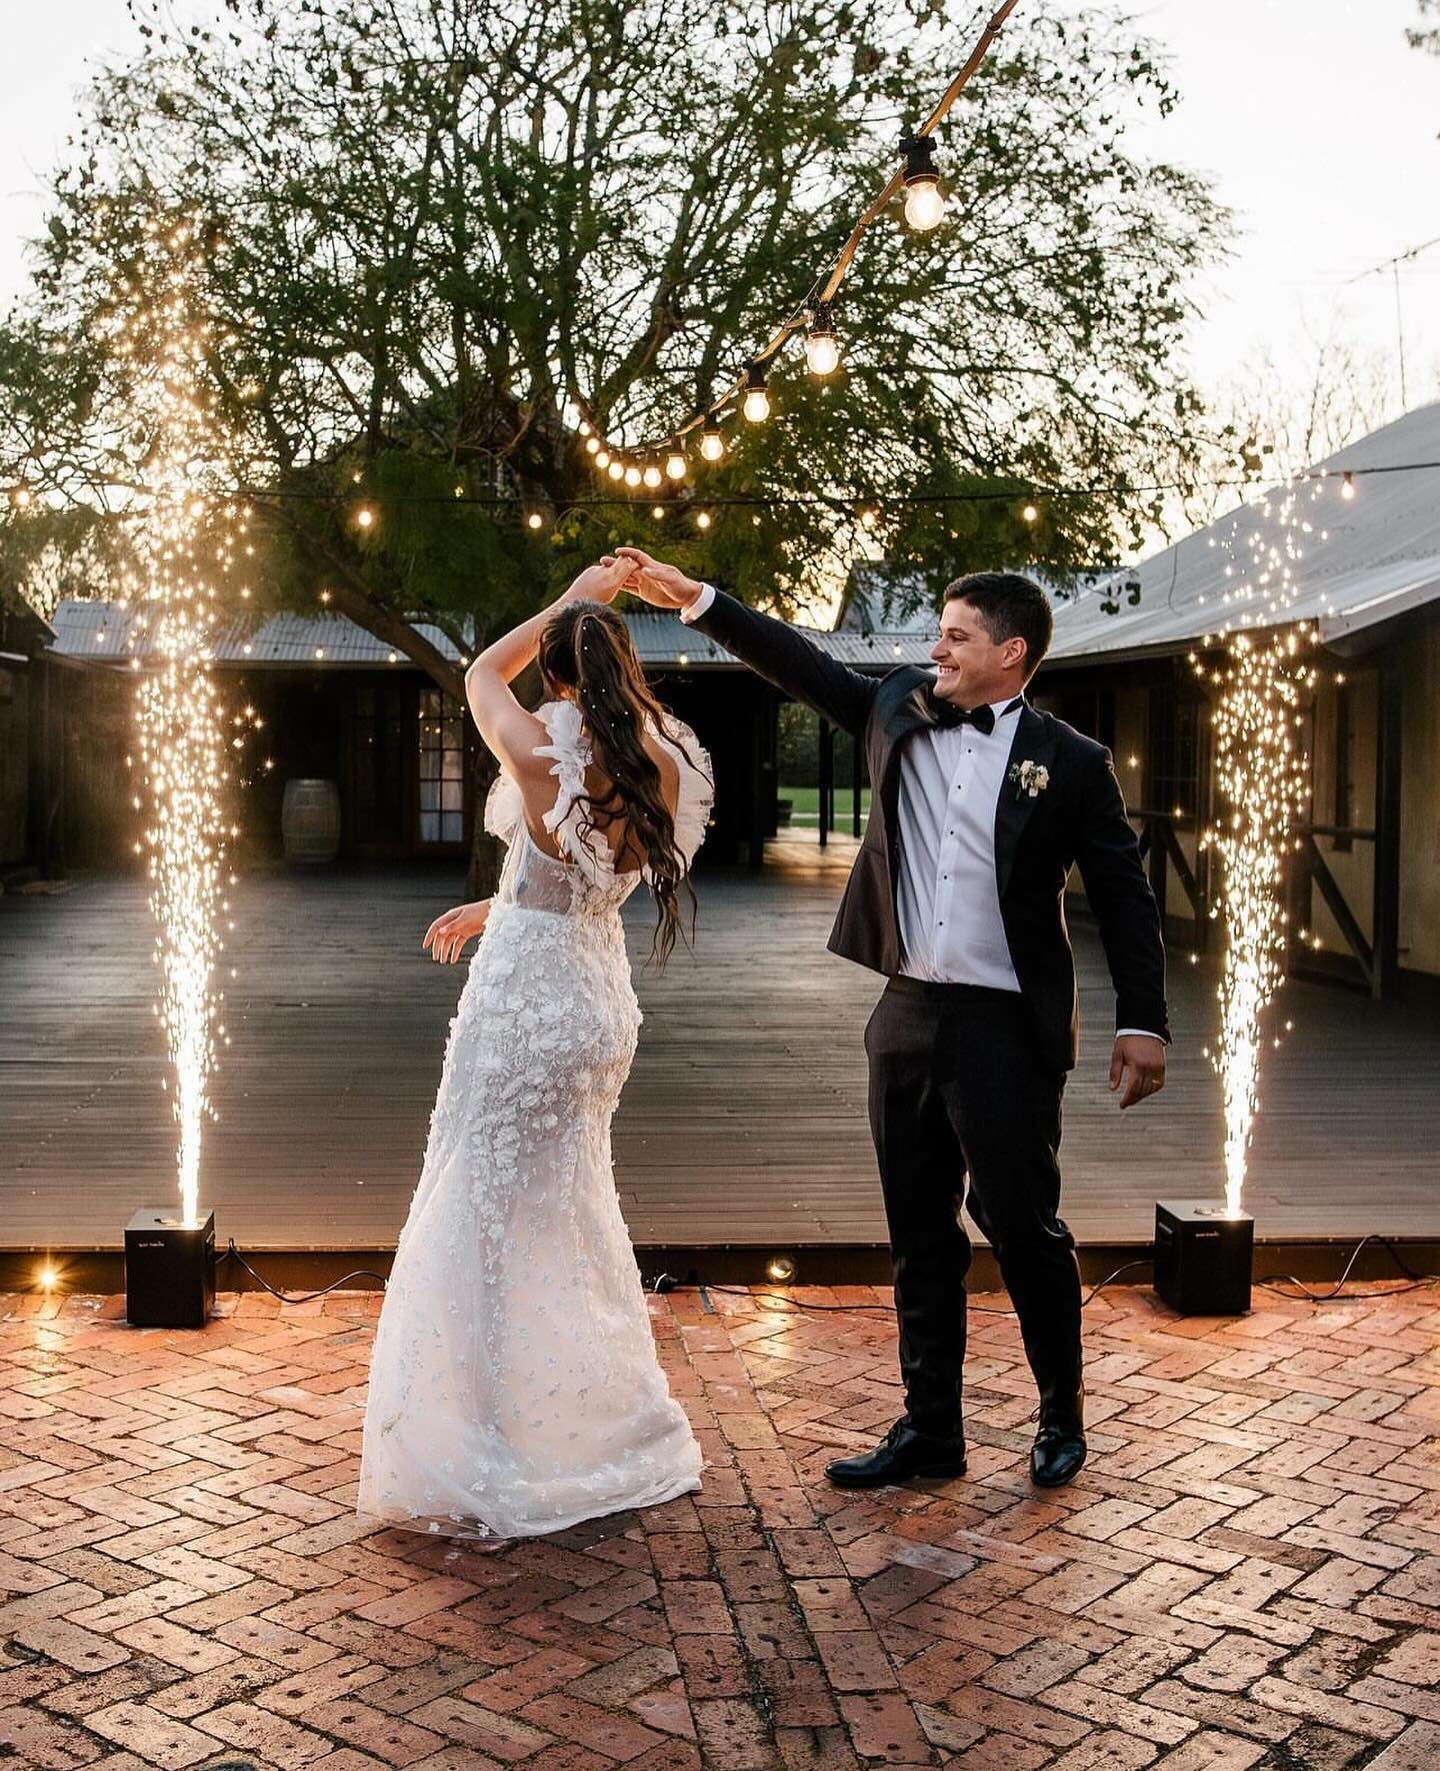 FREE SPARKTACULARS when you book your winter wedding between May - August 2024 + 2025! 

Slide into our DM&rsquo;s or jump onto our website to send us an enquiry! 

📸 @benandebony 

#MargaretRiverWeddings
#SouthWestWeddings
#WesternAustraliaWeddings